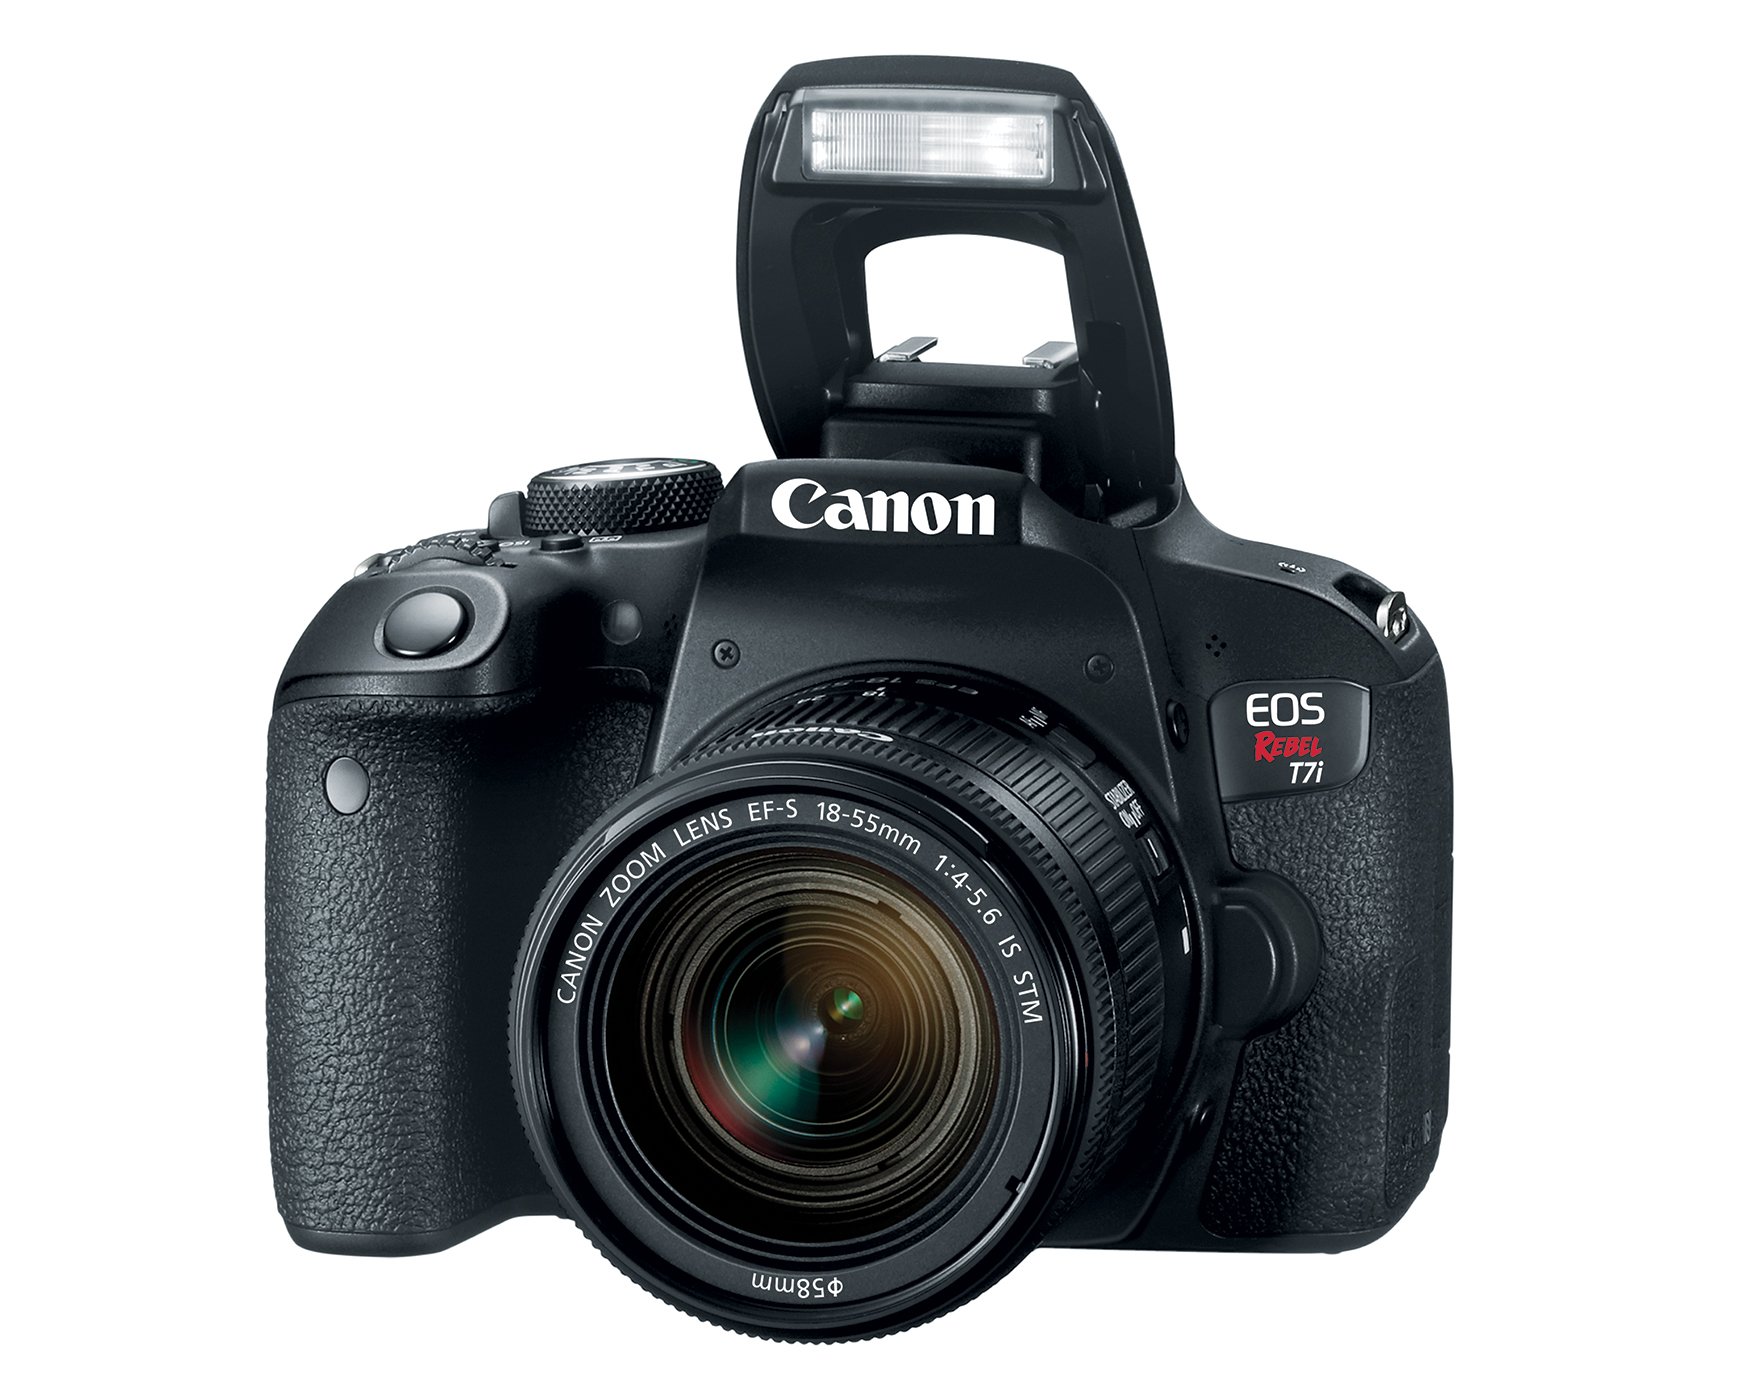 Canon EOS Rebel T7i DSLR Camera with 18-55mm Lens - image 2 of 7